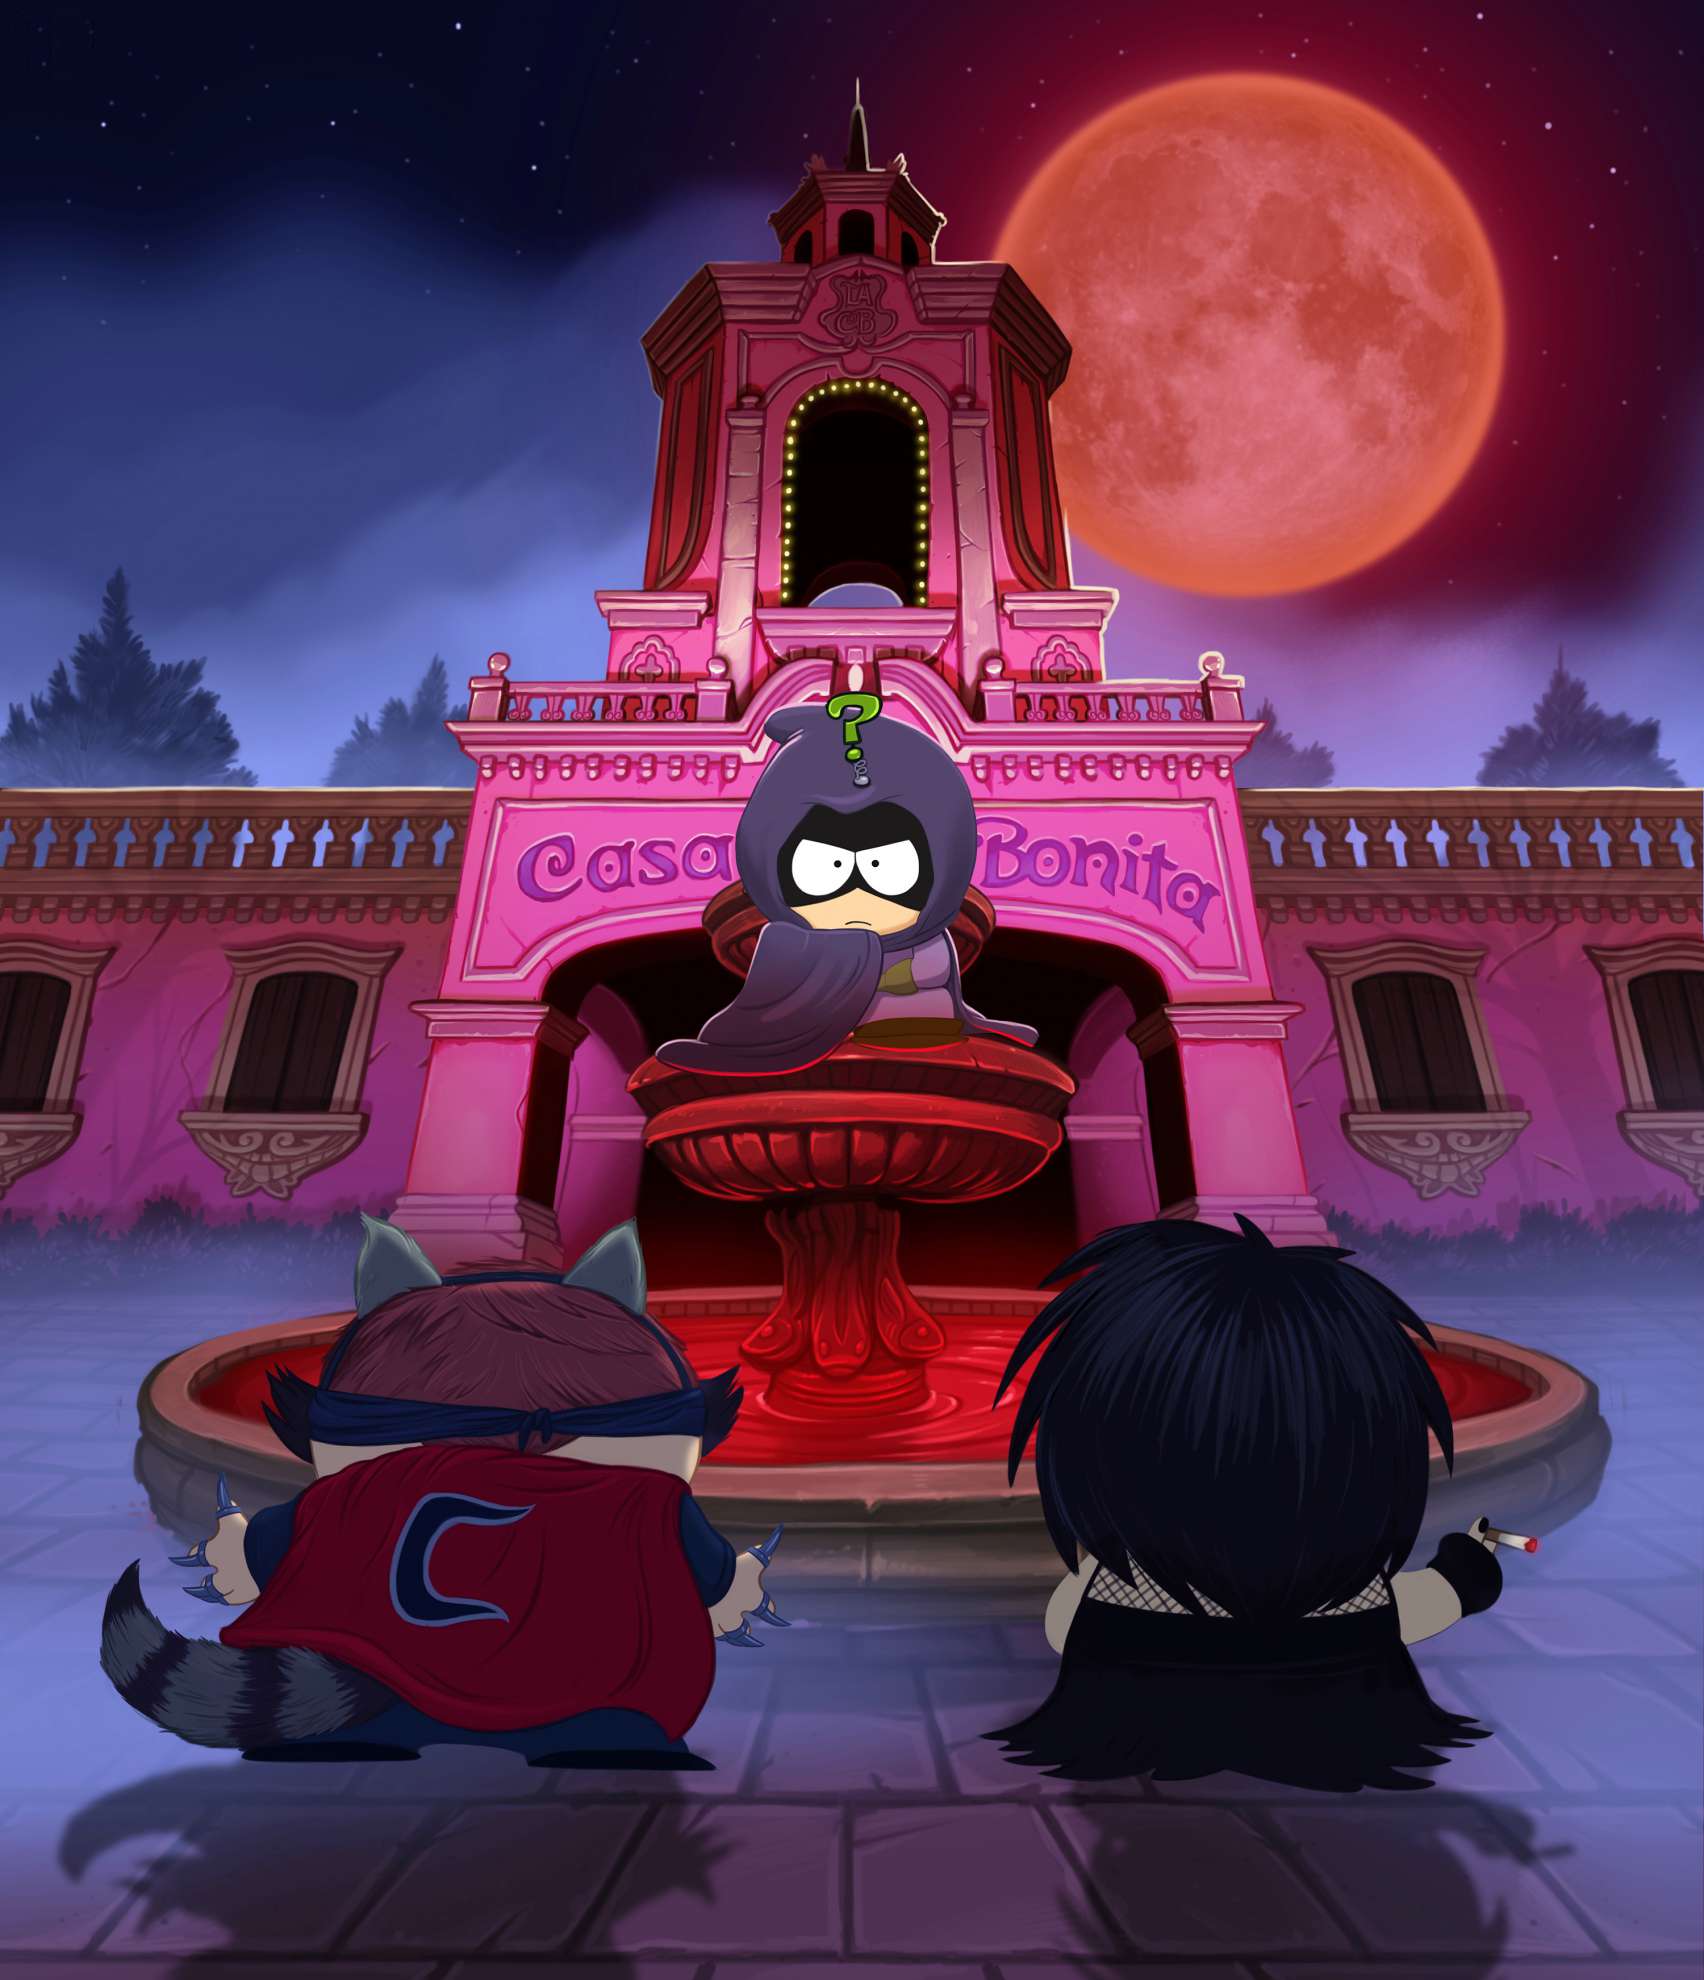 South Park: The Fractured But Whole: From Dusk Till Casa Bonita